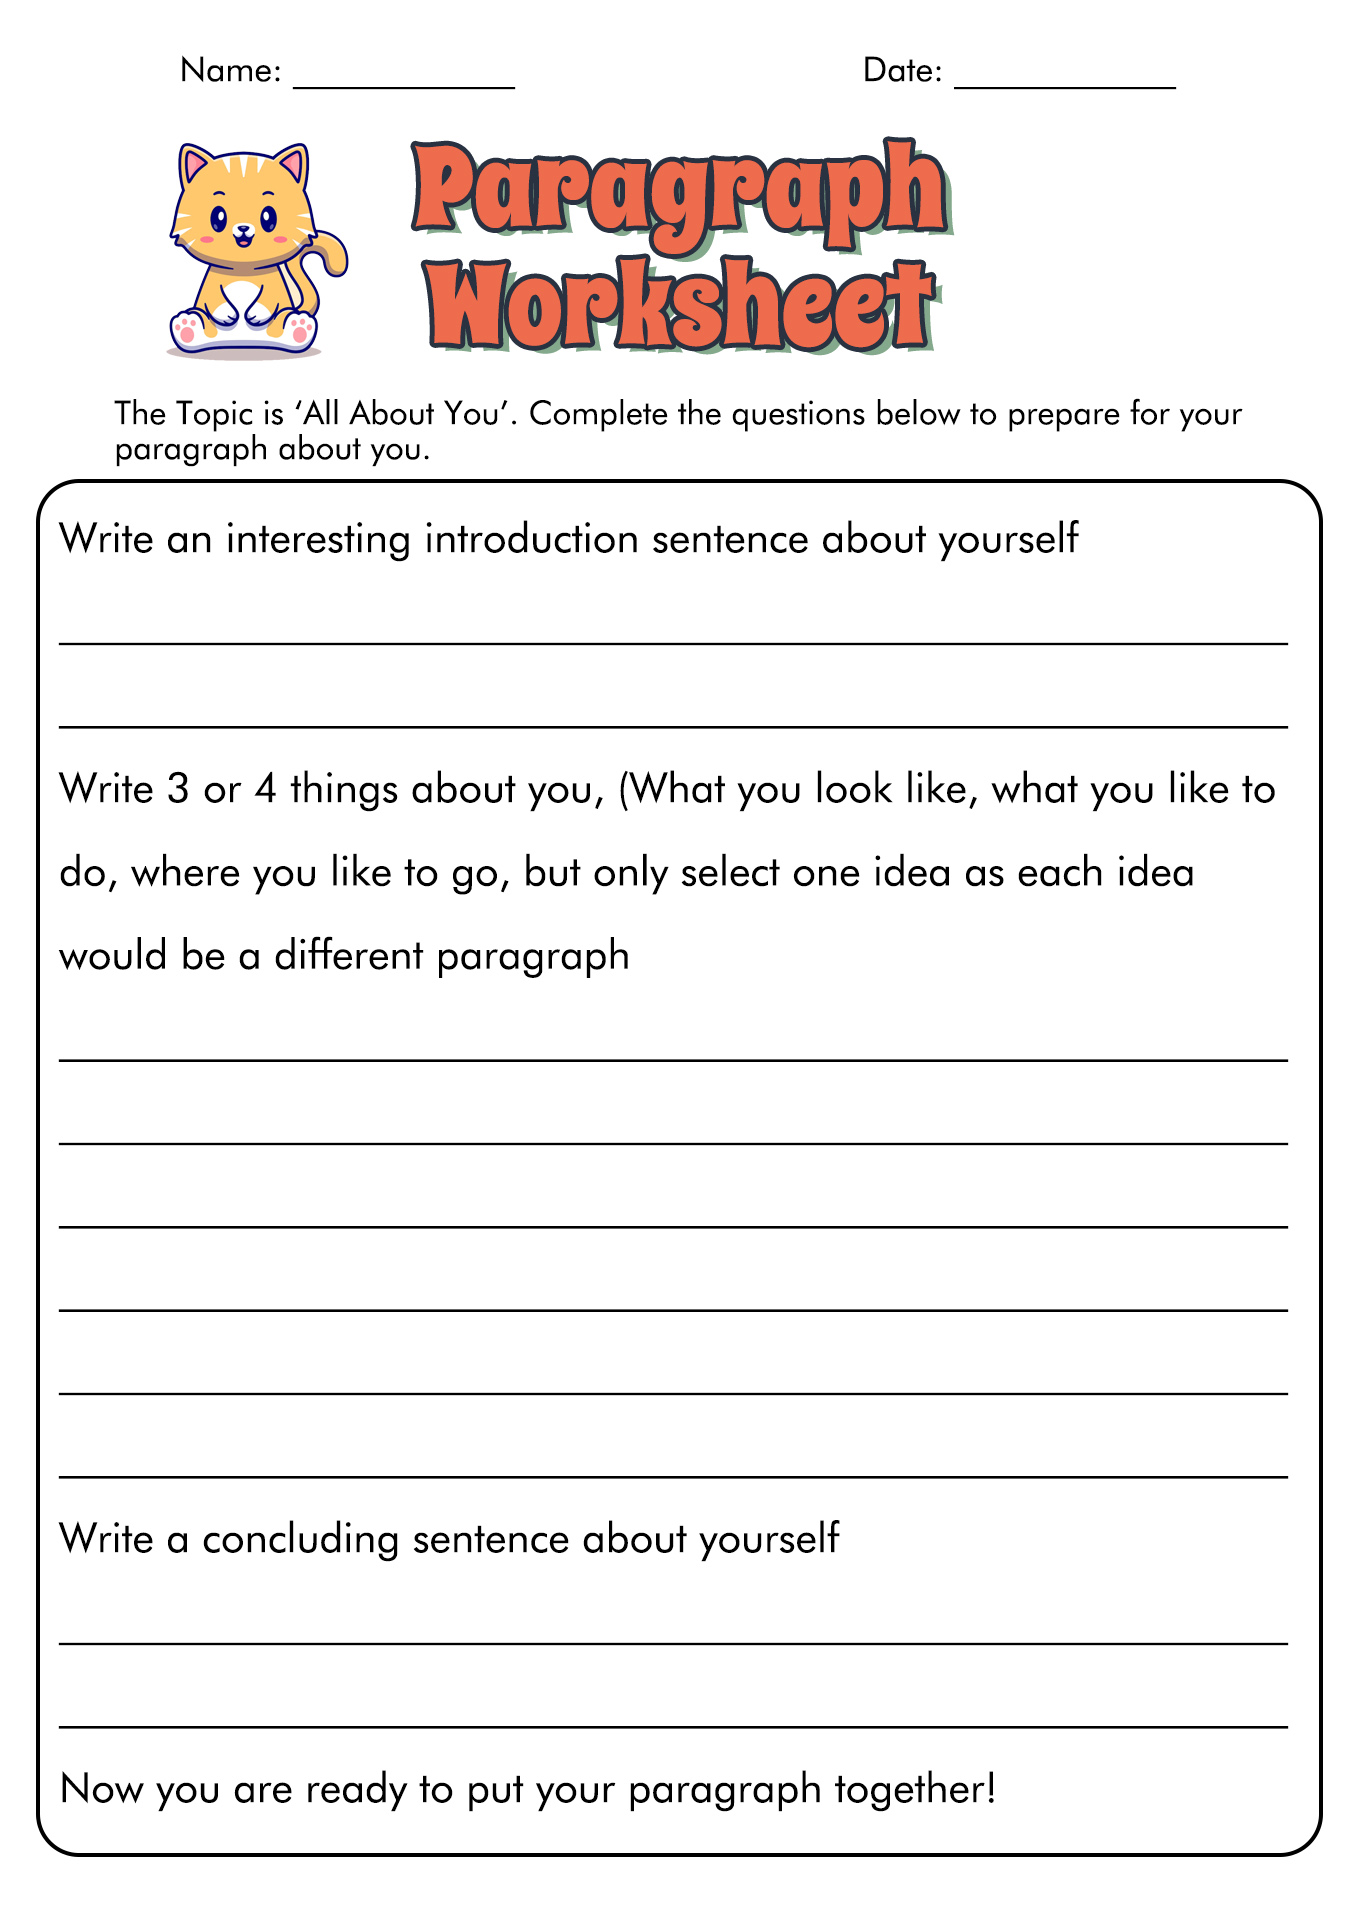 20 Best Images Of Punctuation Worksheets For Grade 5 5th Grade 